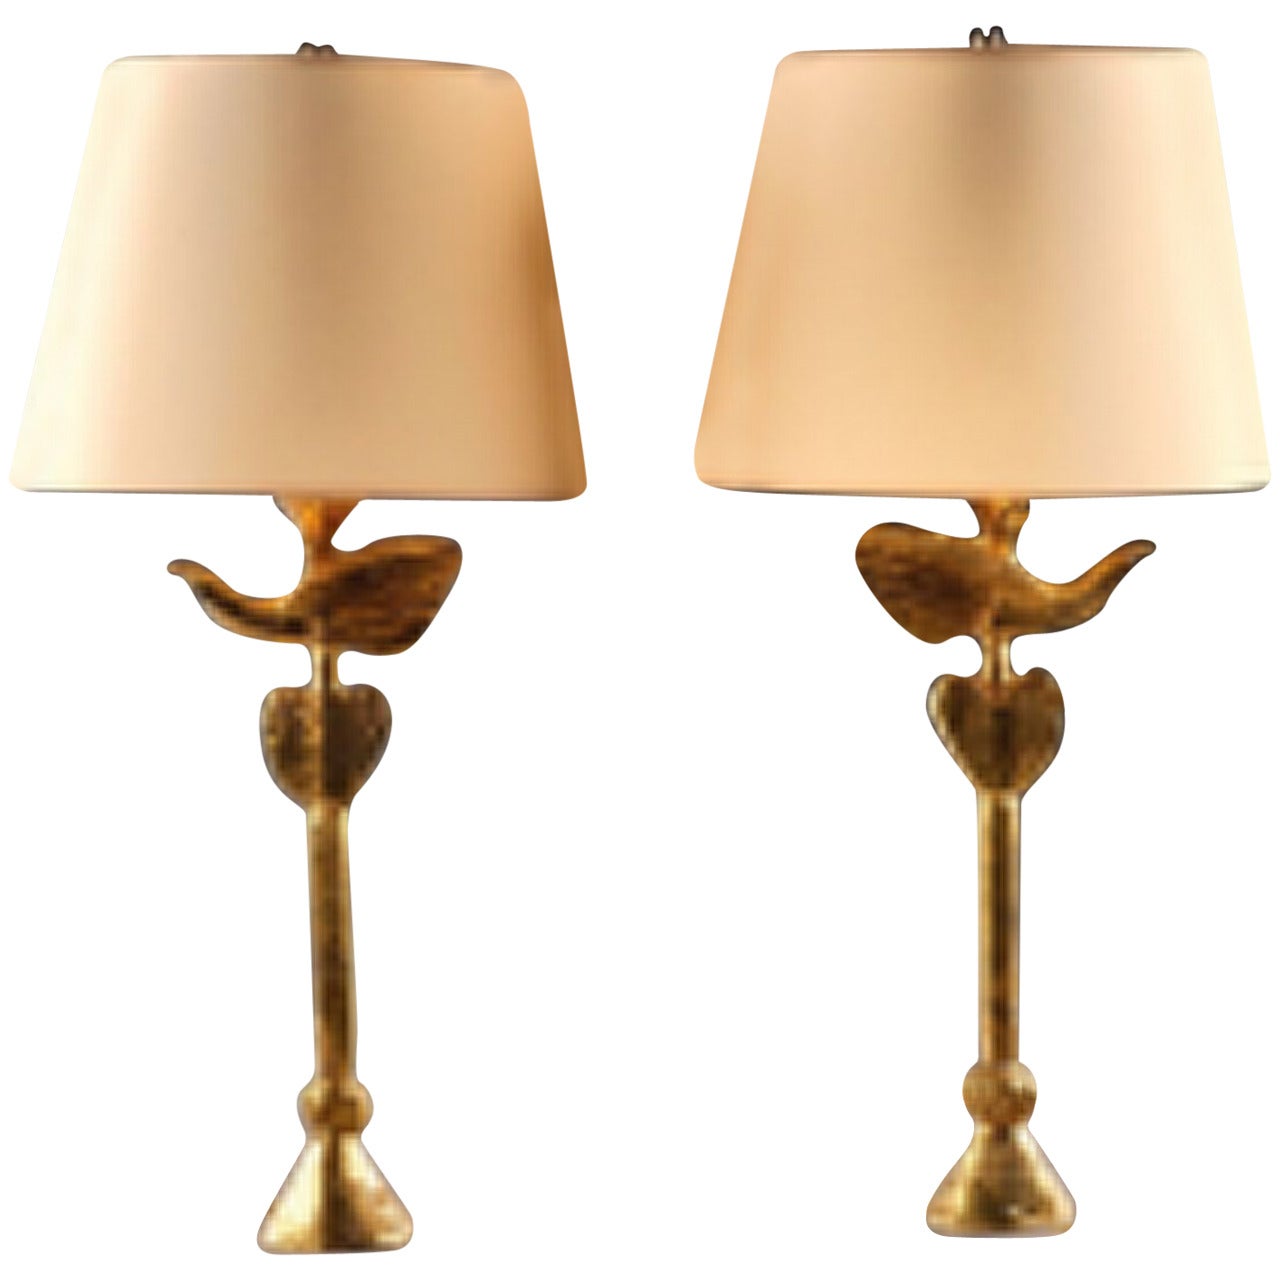 Pair of Figurative Bronze Table Lamps by Pierre Casenove